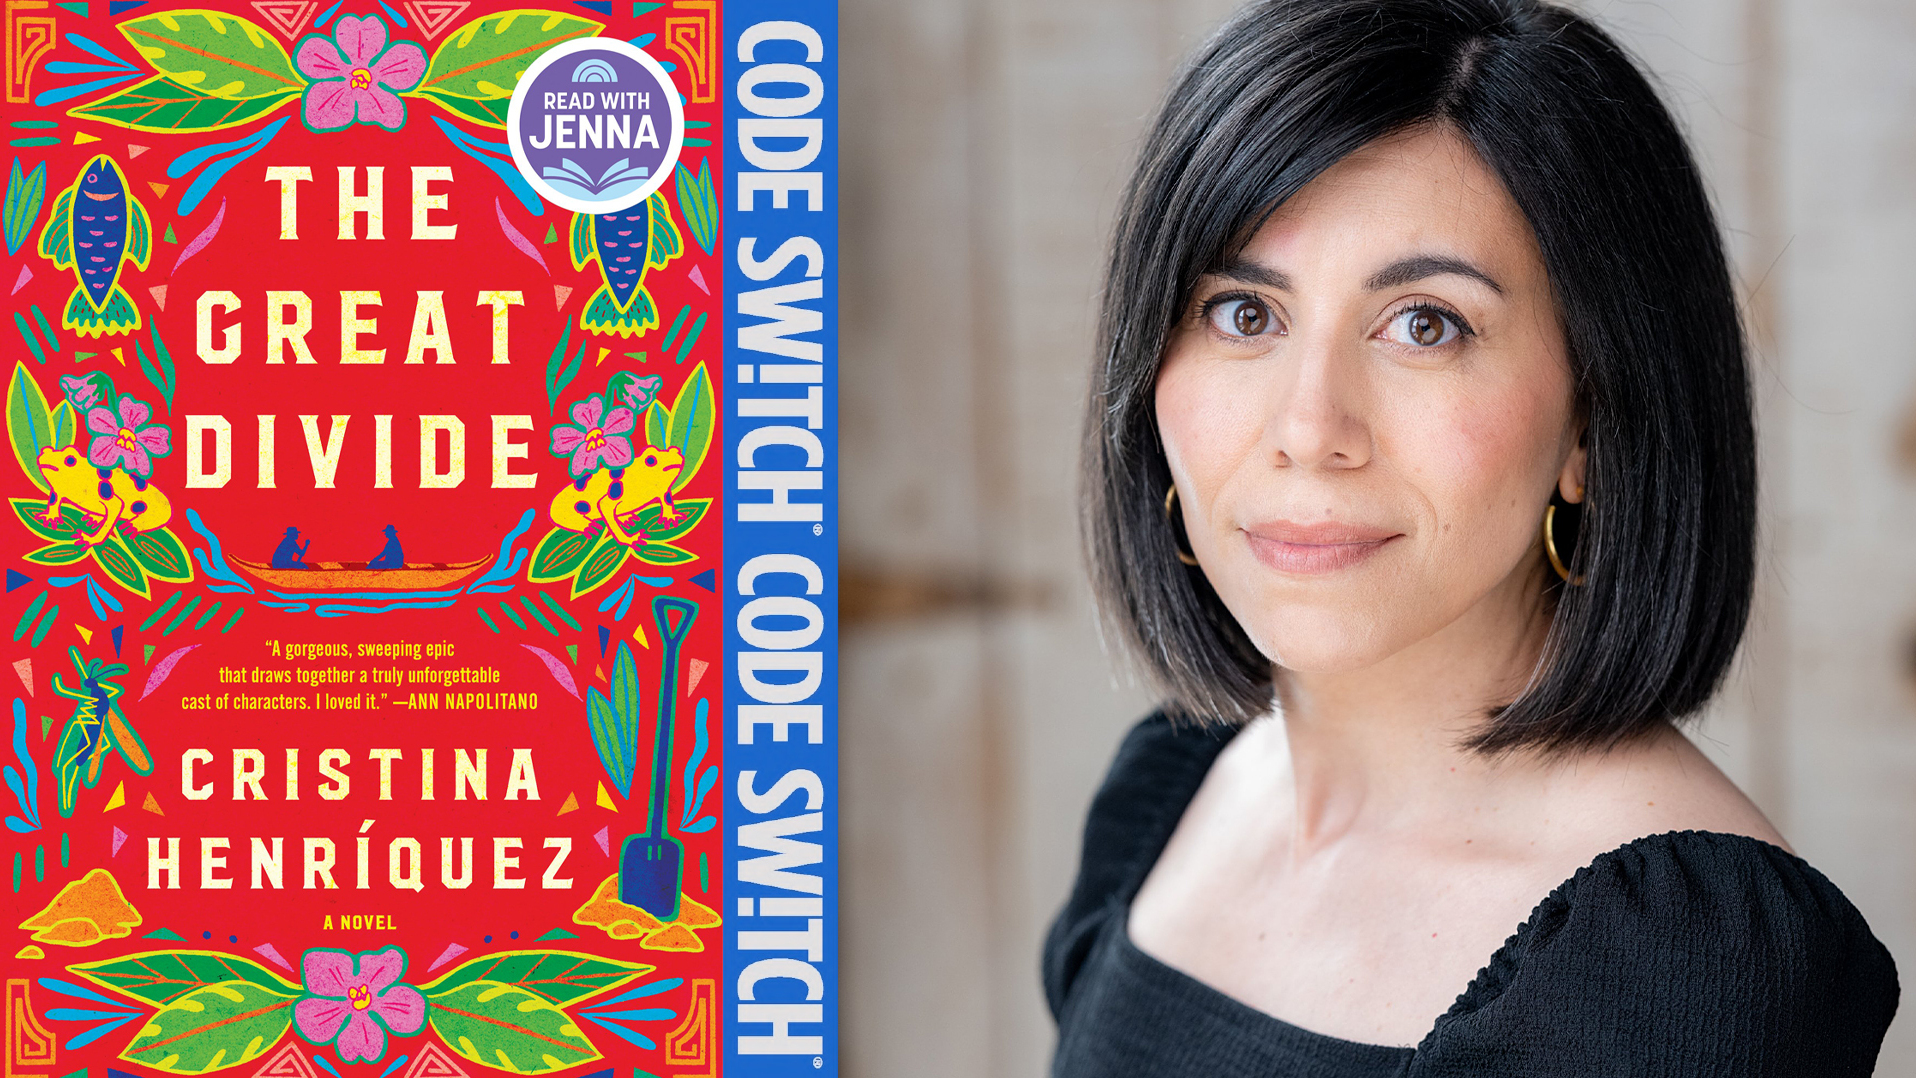 Author Cristina Henriquez next to the cover of her new novel, <em>The Great Divide.</em>‘/></p>
<p>The Panama Canal has been dubbed the greatest engineering feat in human history. It’s also (perhaps less favorably) been called the greatest liberty mankind has ever taken with Mother Nature. But due to climate change, the Canal is drying up and fewer than half of the ships that used to pass through are now able to do so. So how did we get here? Today on the show, we’re talking to Cristina Henriquez, the author of a new novel that explores the making of the Canal. It took 50,000 people from 90 different countries to carve the land in two — and the consequences of that extraordinary, nature-defying act are still echoing through our present.</p>
<p><img src=